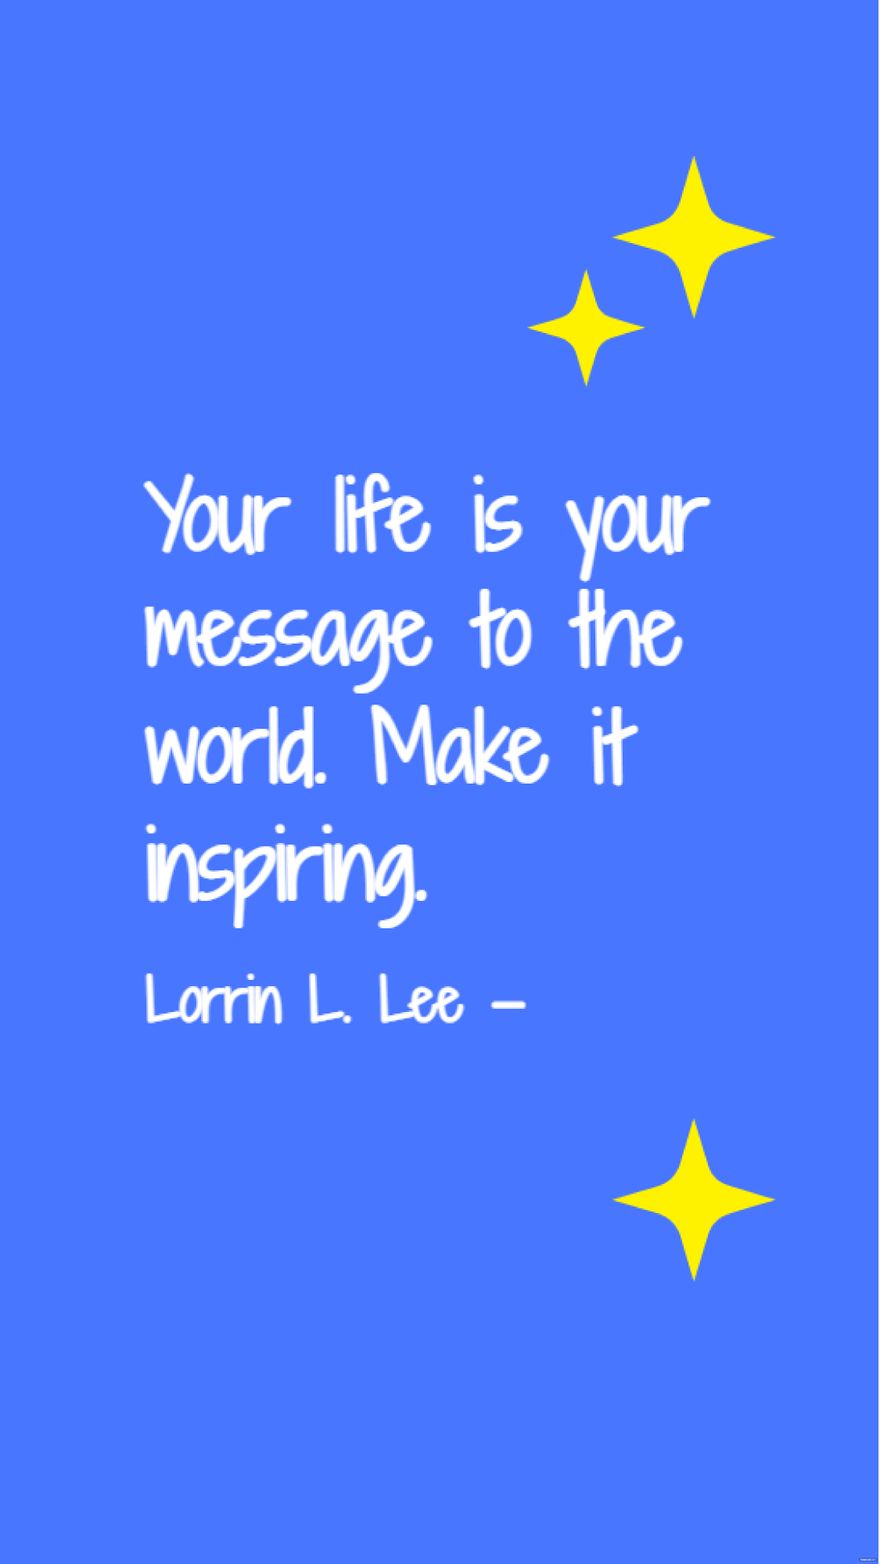 Lorrin L. Lee - Your life is your message to the world. Make it inspiring.